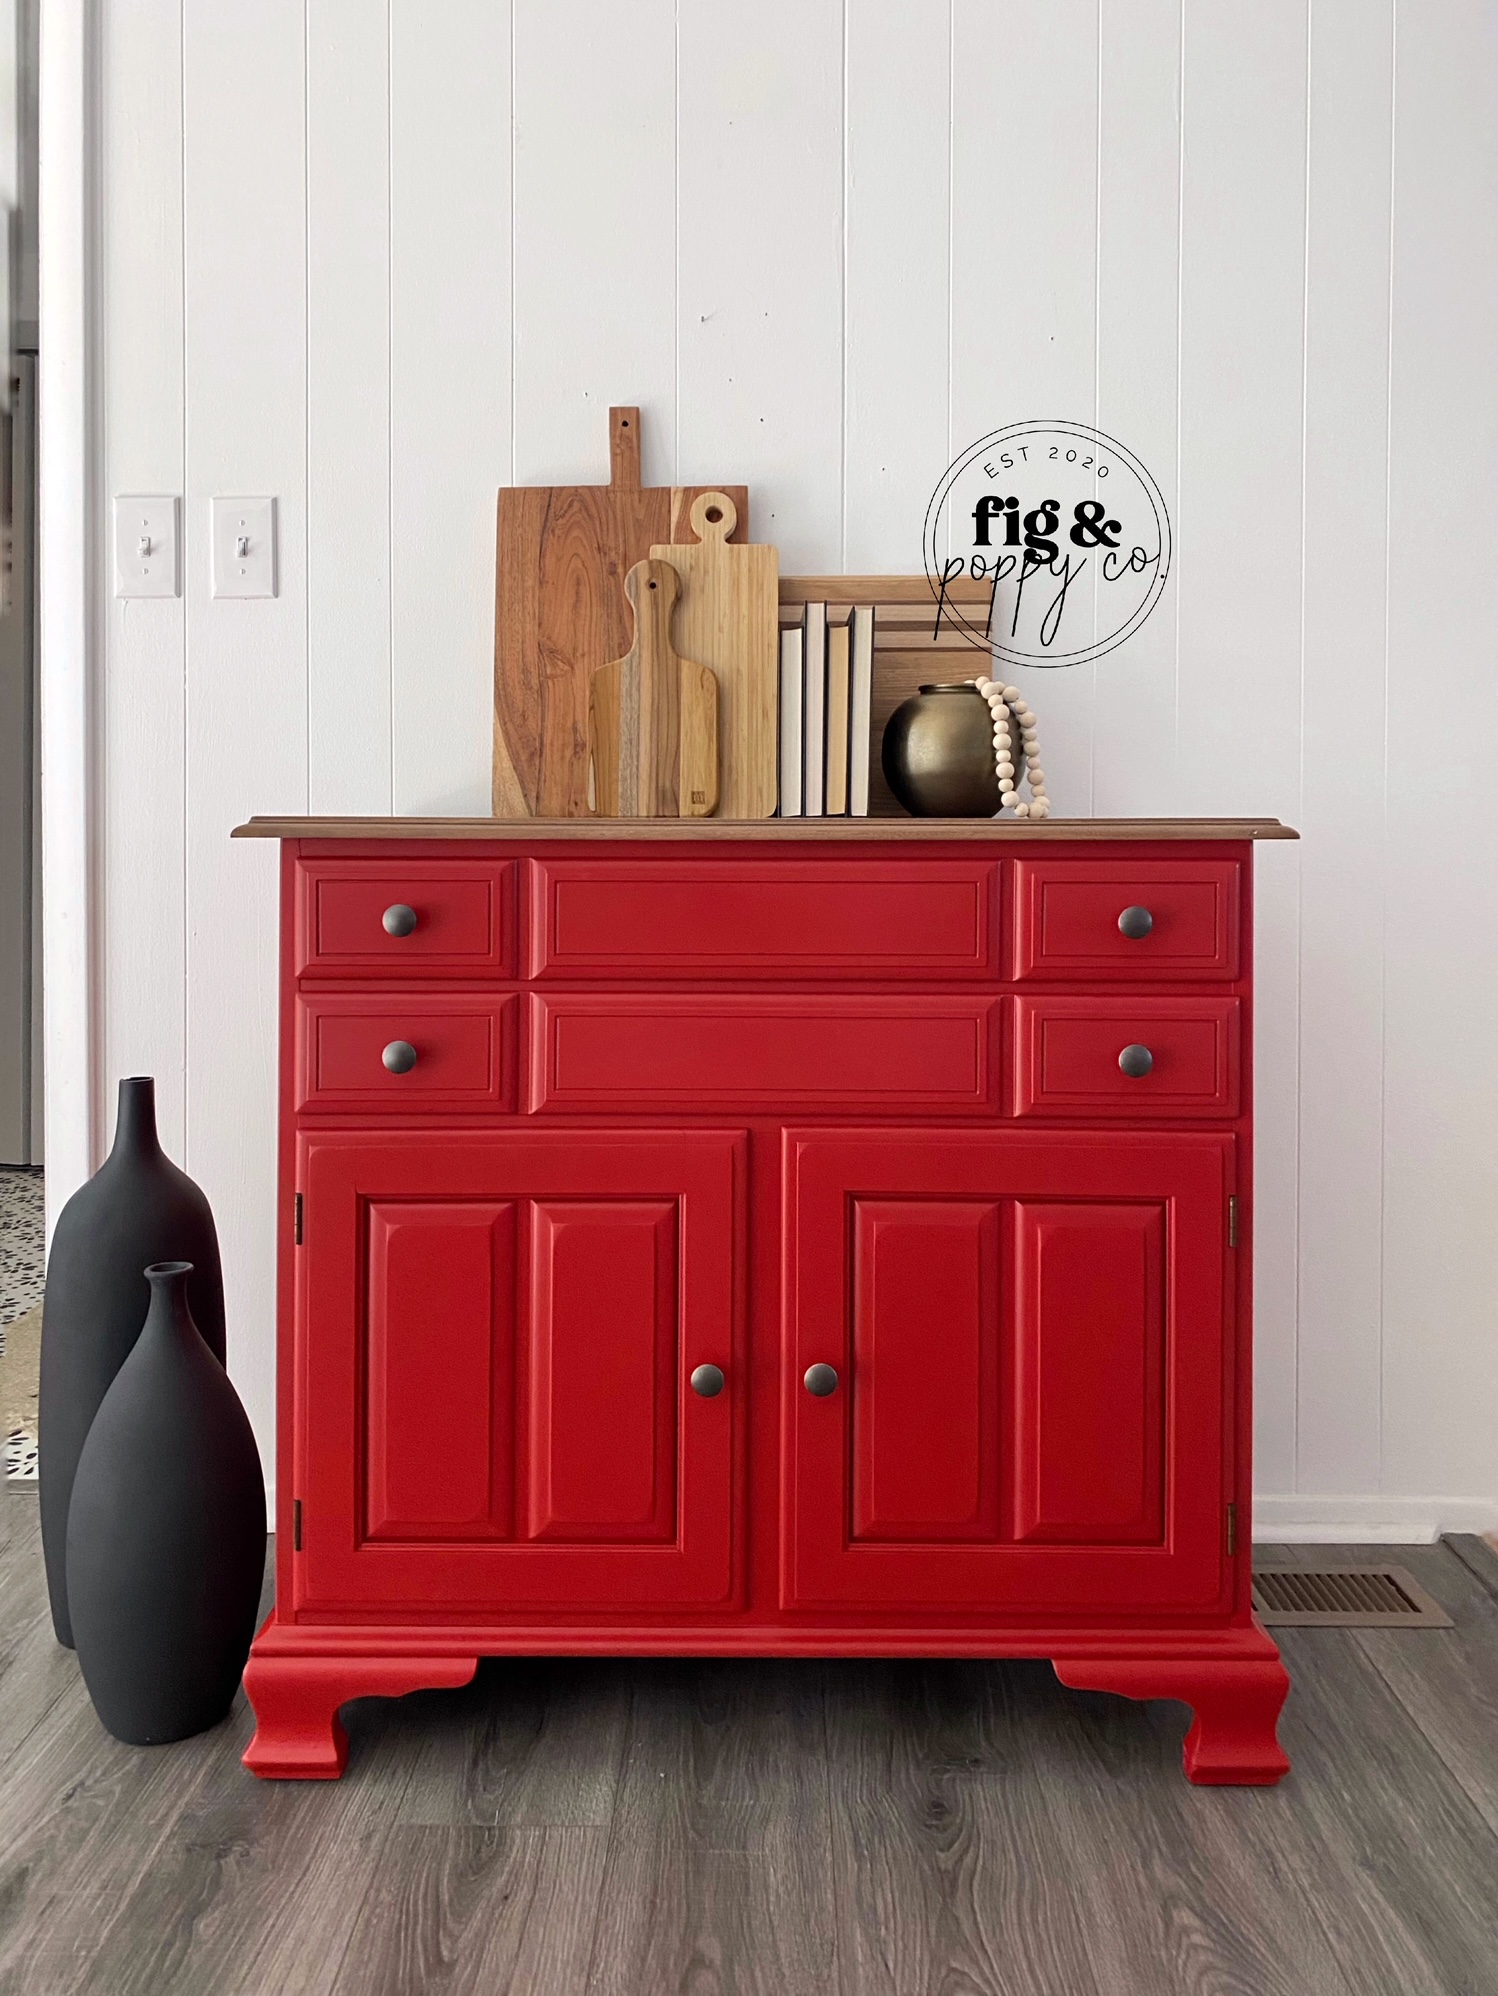 petite farmhouse cabinet in bold radiant red, two drawers and two doors, wodden cutting board, books, floor vases